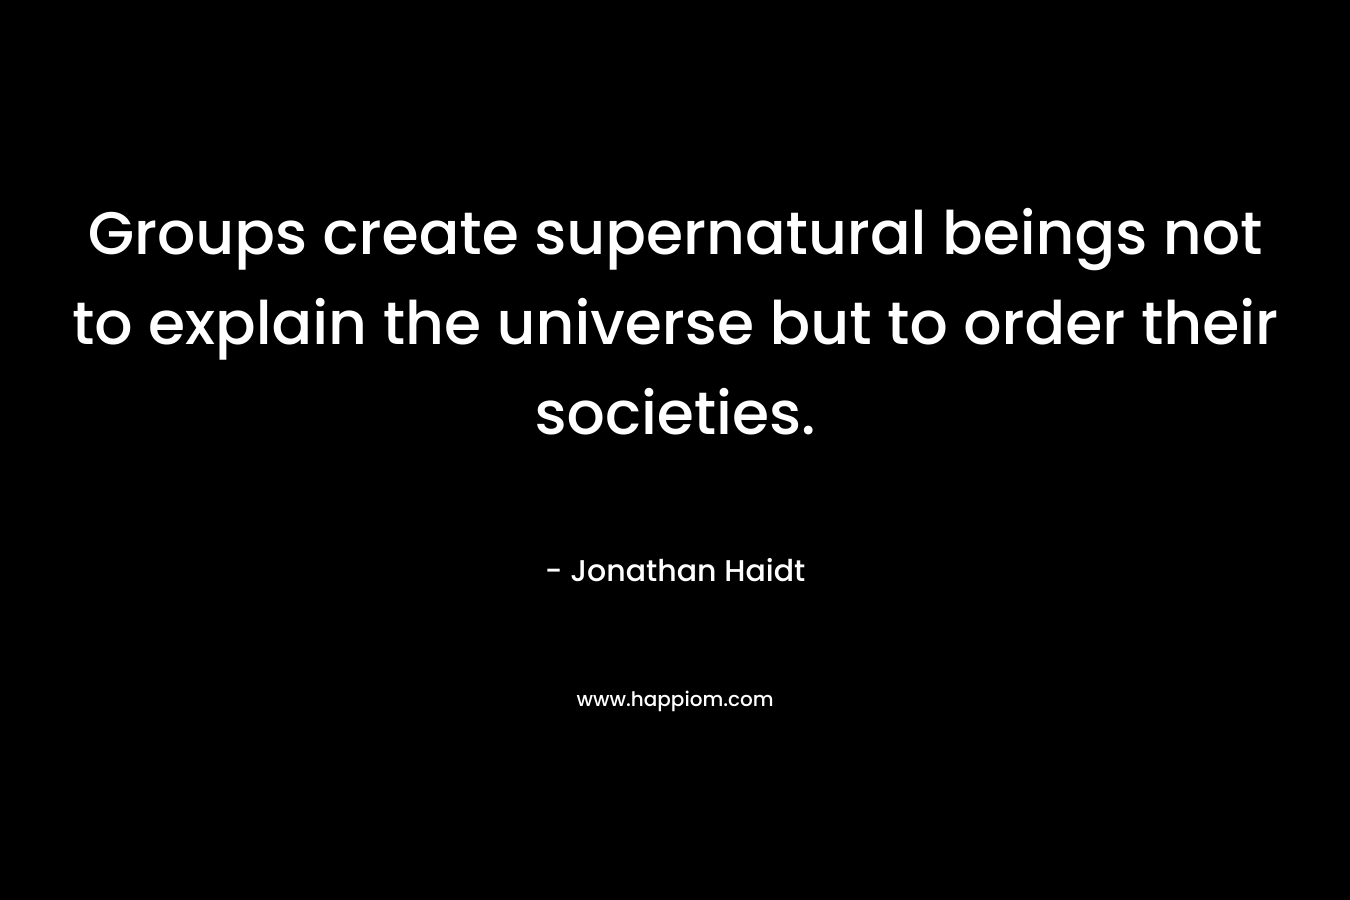 Groups create supernatural beings not to explain the universe but to order their societies. – Jonathan Haidt